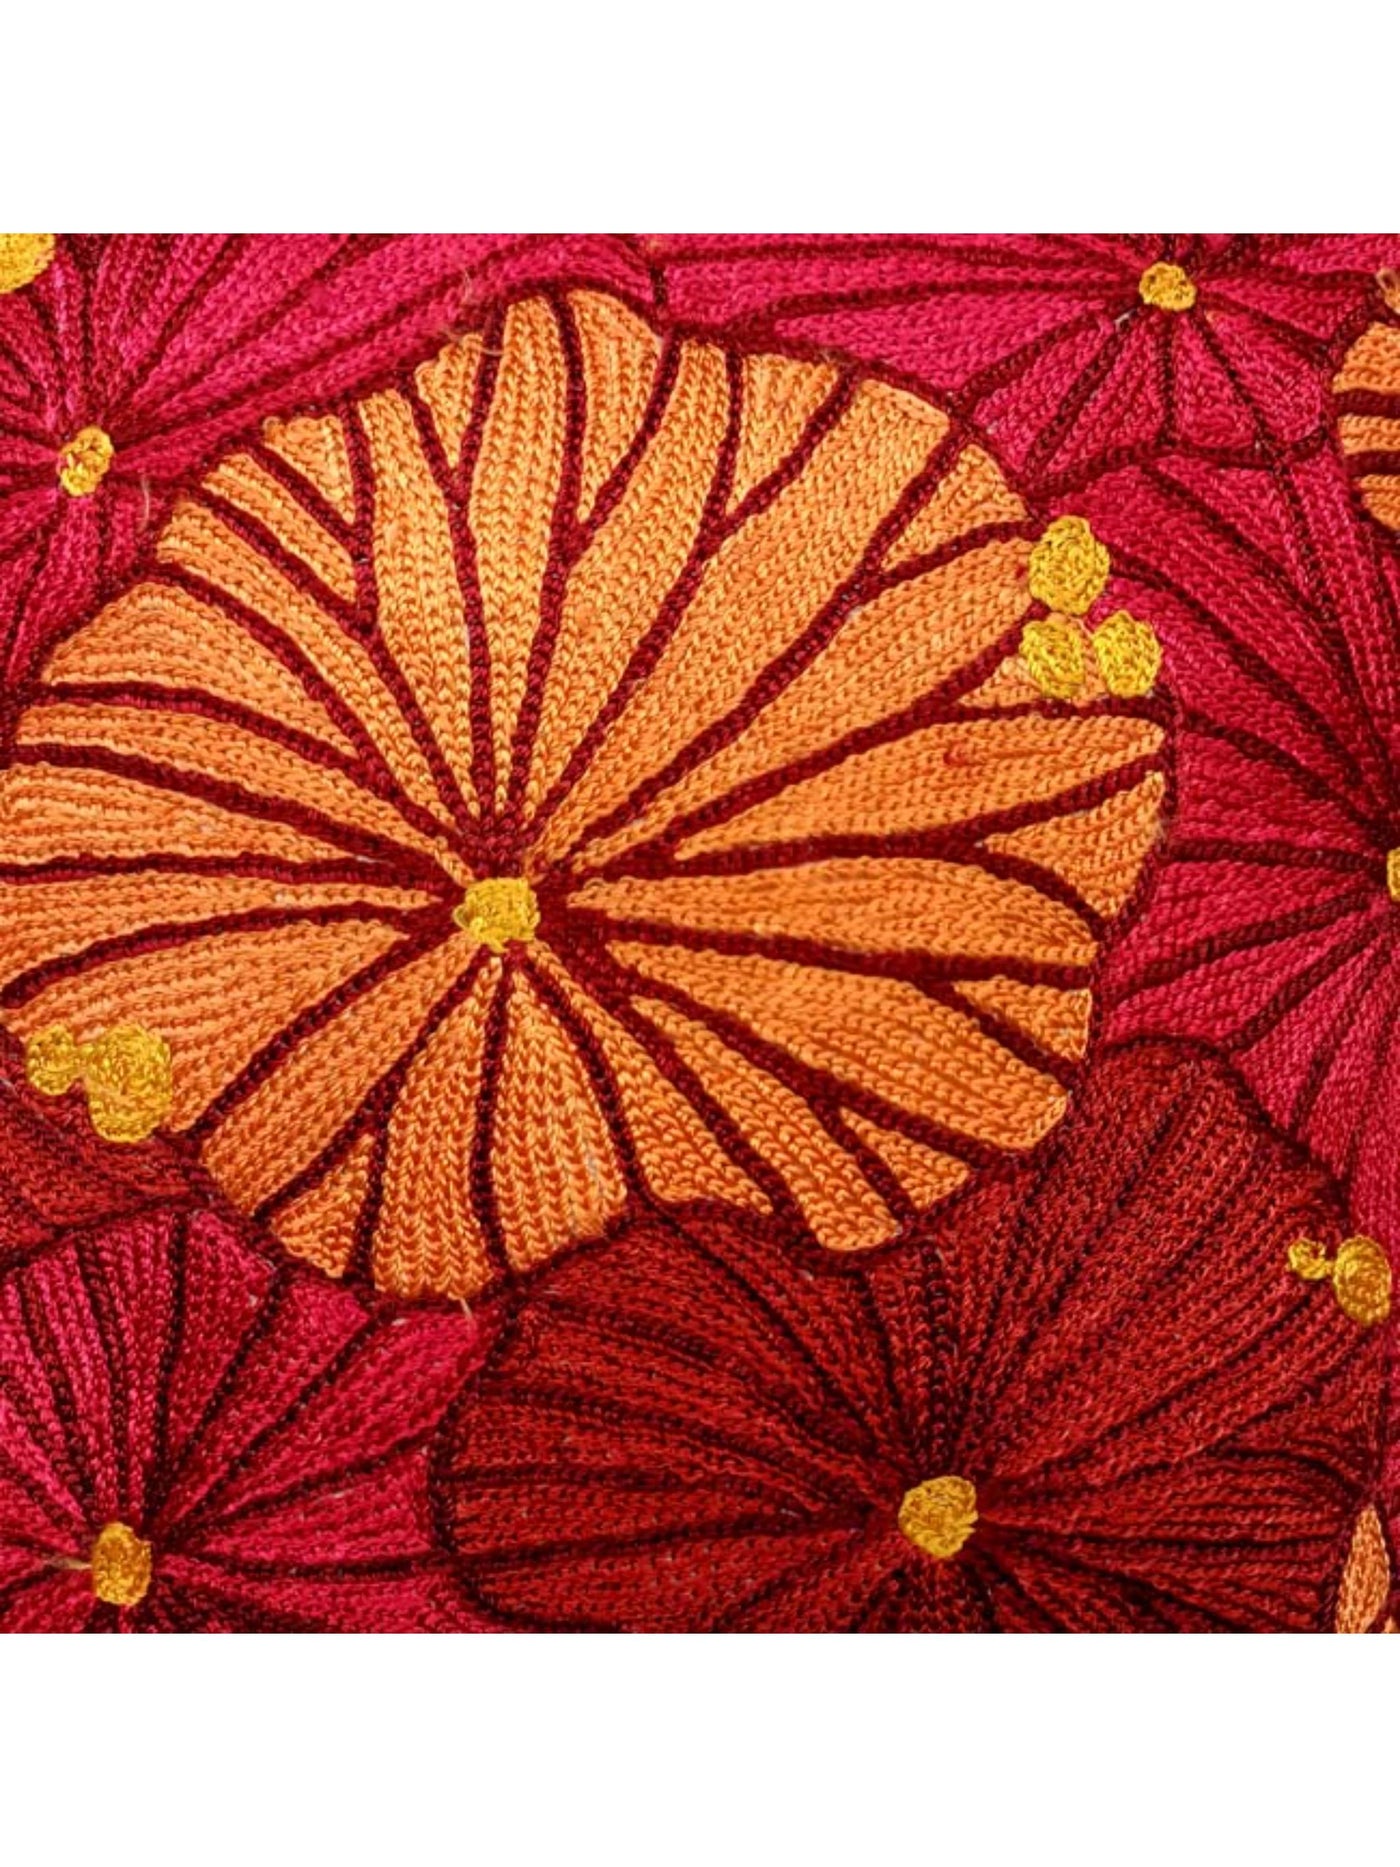 Cushion Cover - Fronds Chainstitch Embroidered  Red & Yellow